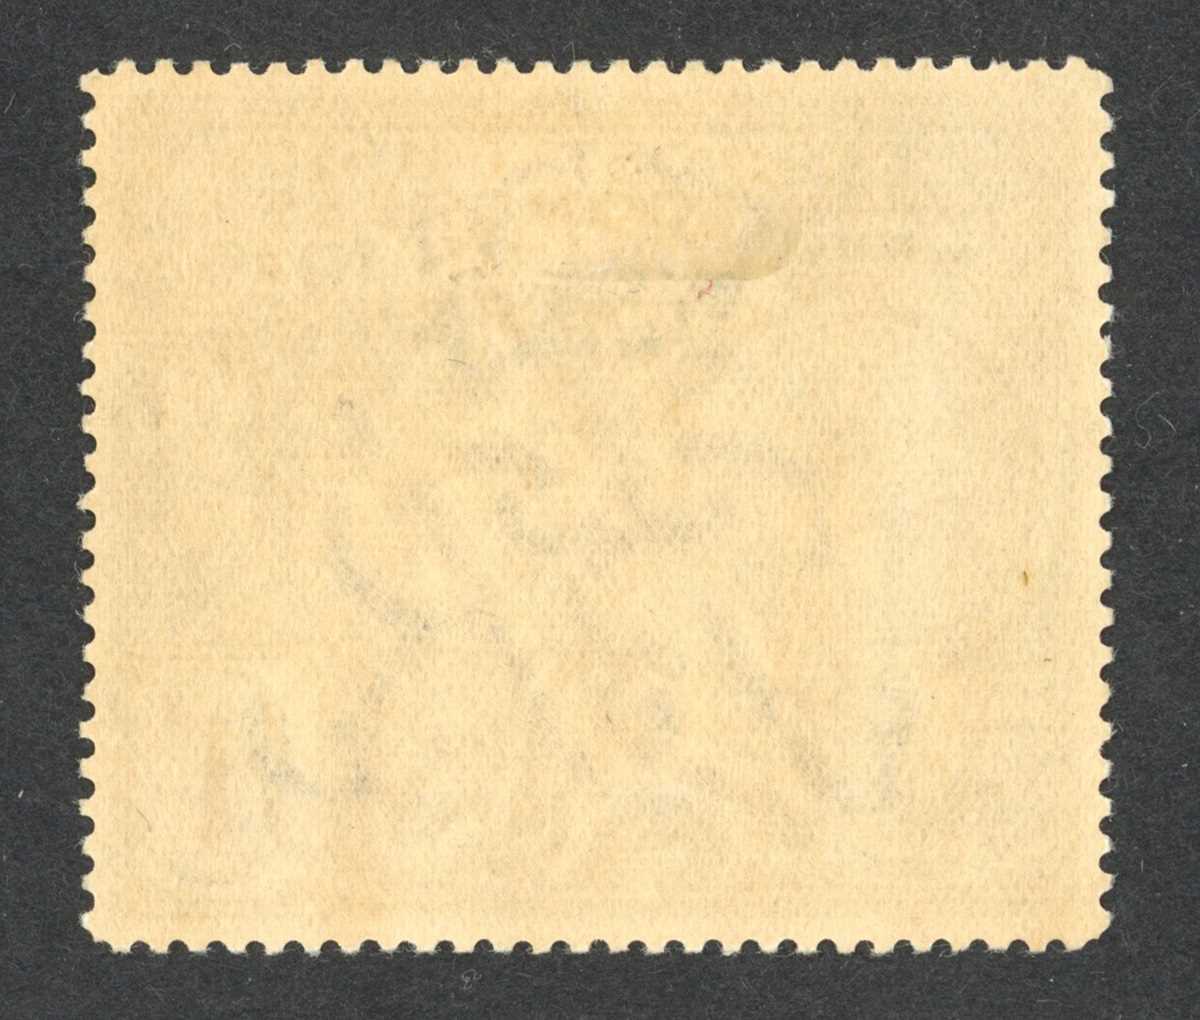 Great Britain 1929 PUC £1 stamp, fine mounted mint. - Image 2 of 2